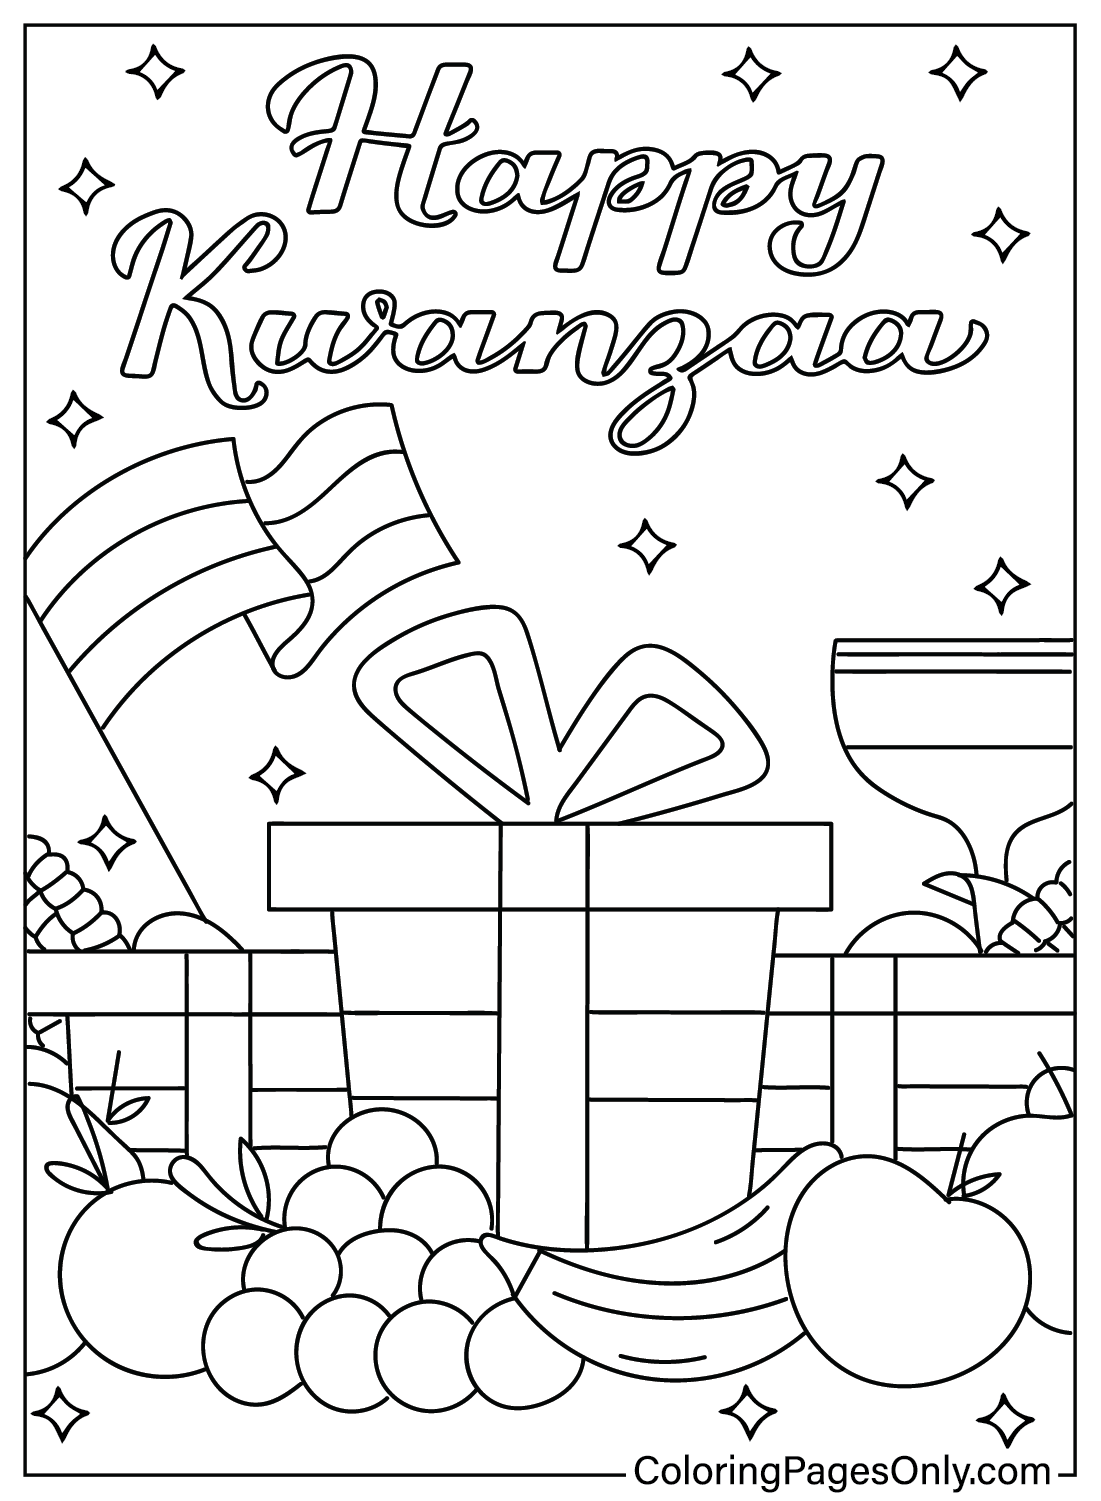 Coloring pages only on x kwanzaa coloring pages ðï httpstcopdlibxsft kwanzaa december christmas xmas holidays winter gifts coloringpagesonly coloringpages coloringbook art fanart sketch drawing draw coloring usa trend